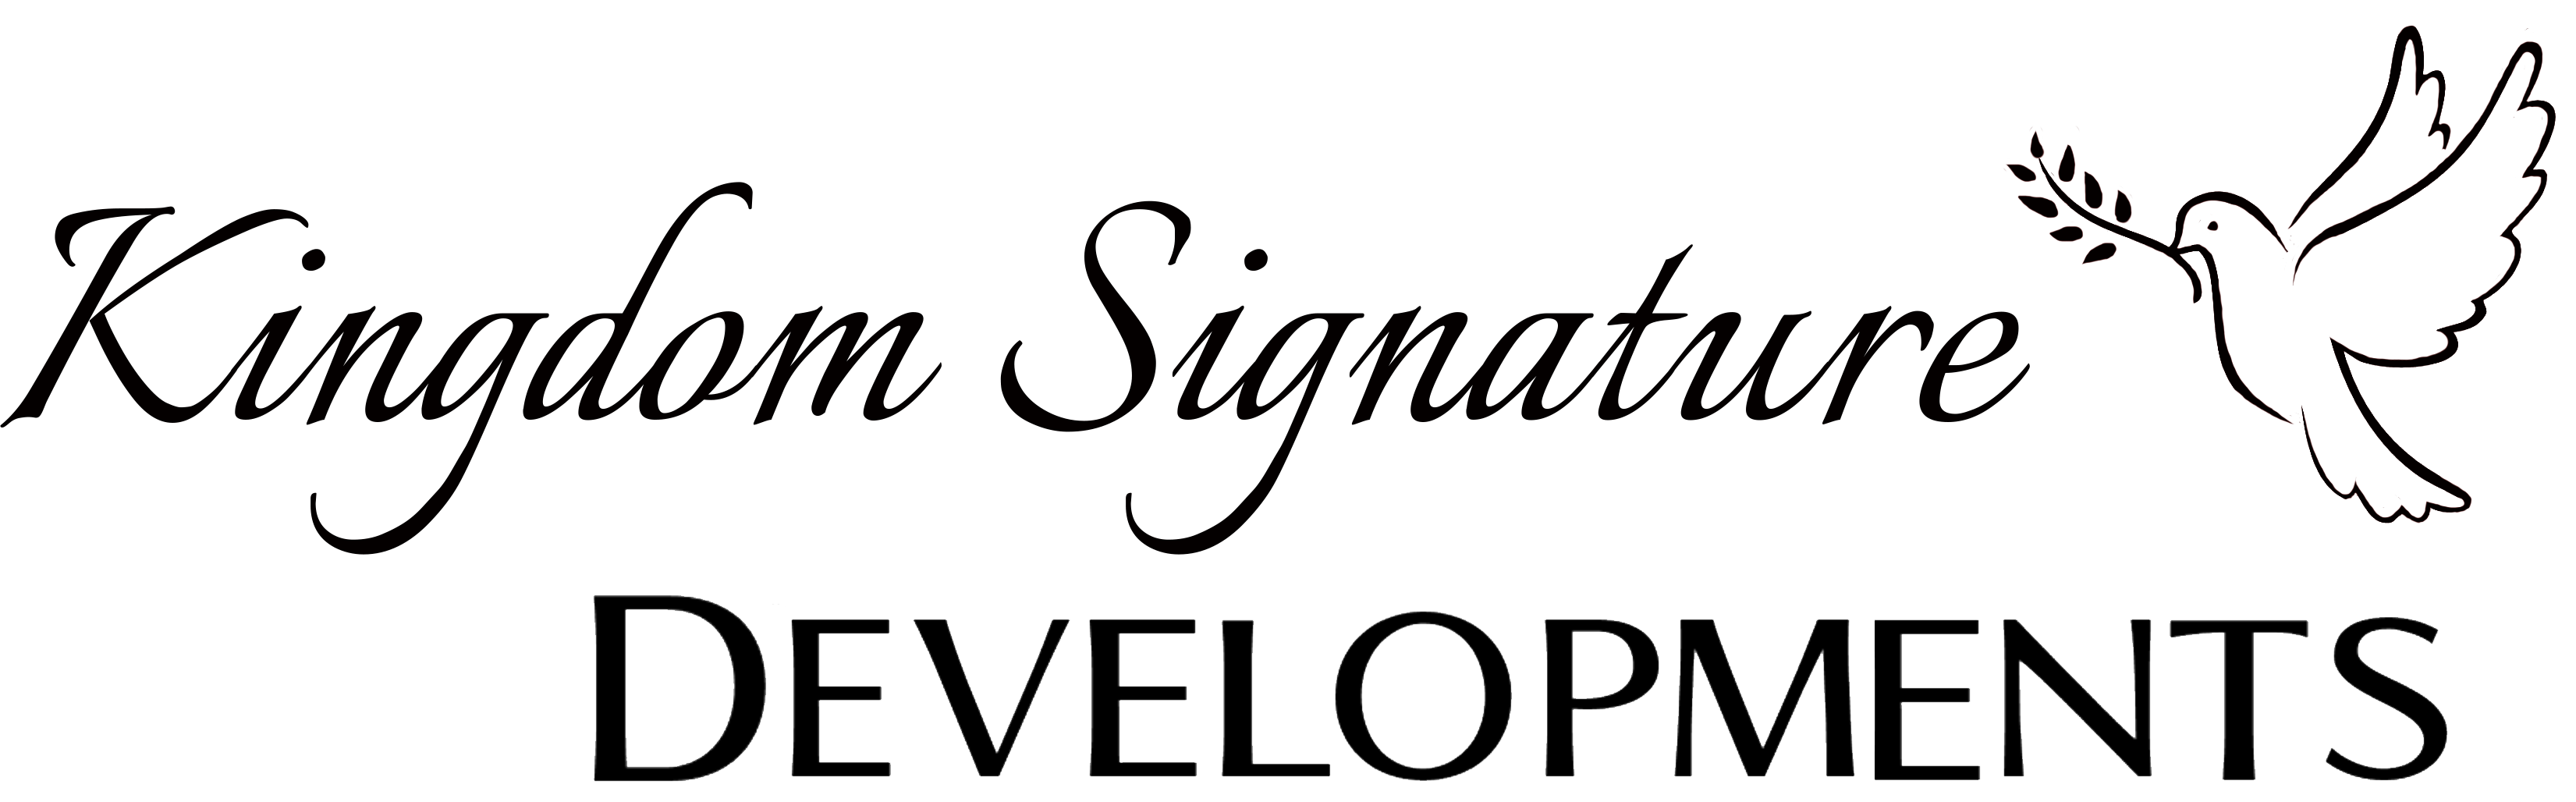 A black logo on a white background that says Kingdom Signature in script font, and the word developments below in a sans serif font and a line drawing of a dove with an  olive branch to the right of the words.